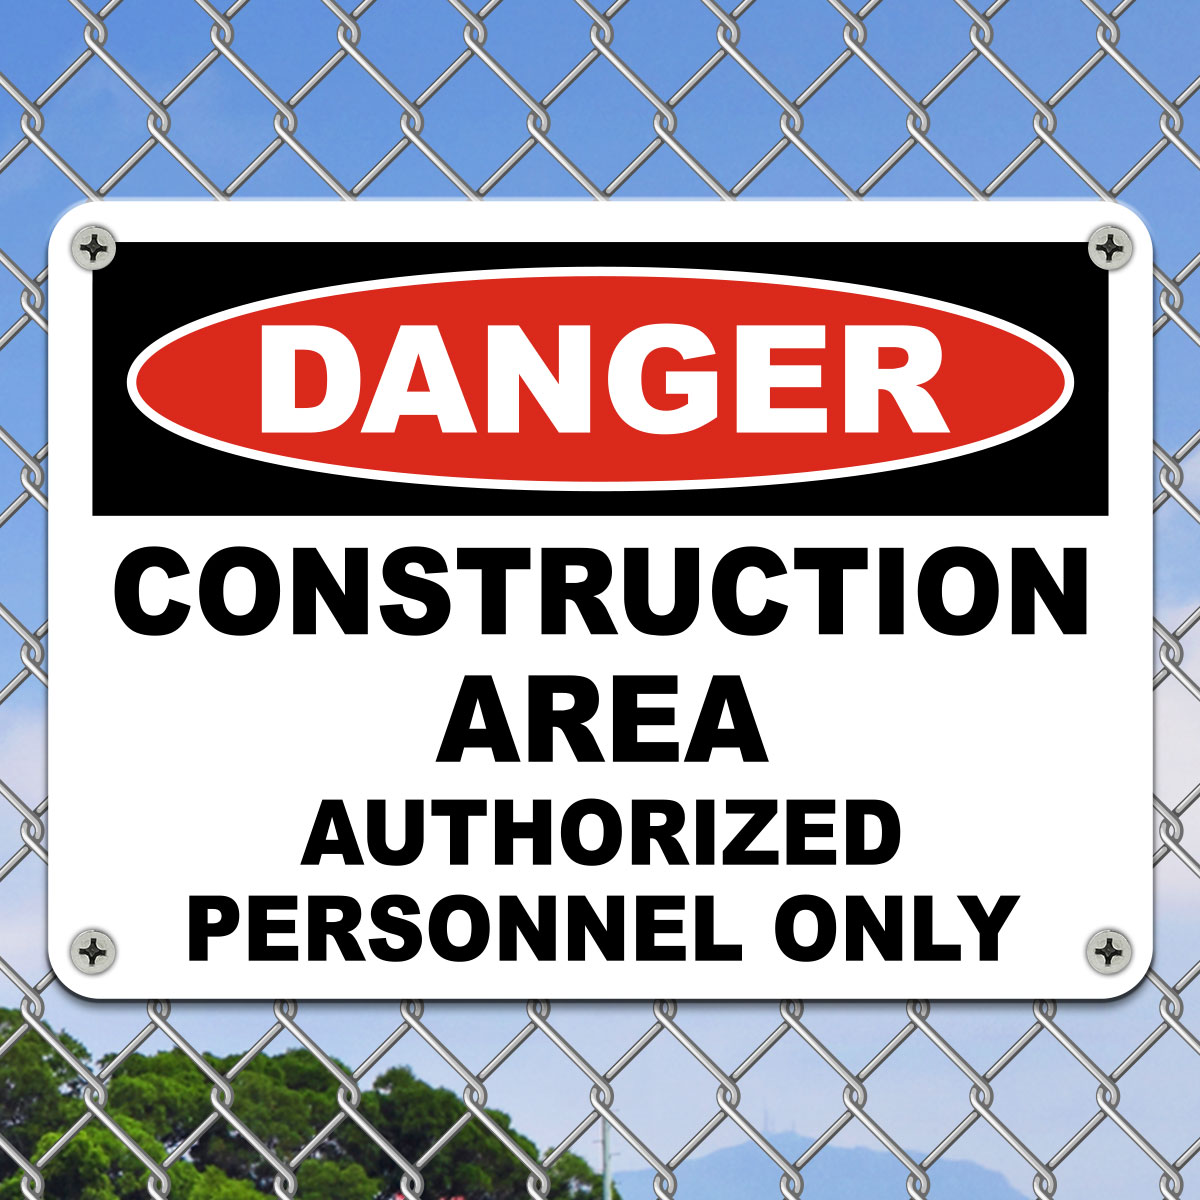 Construction Safety Signs Images